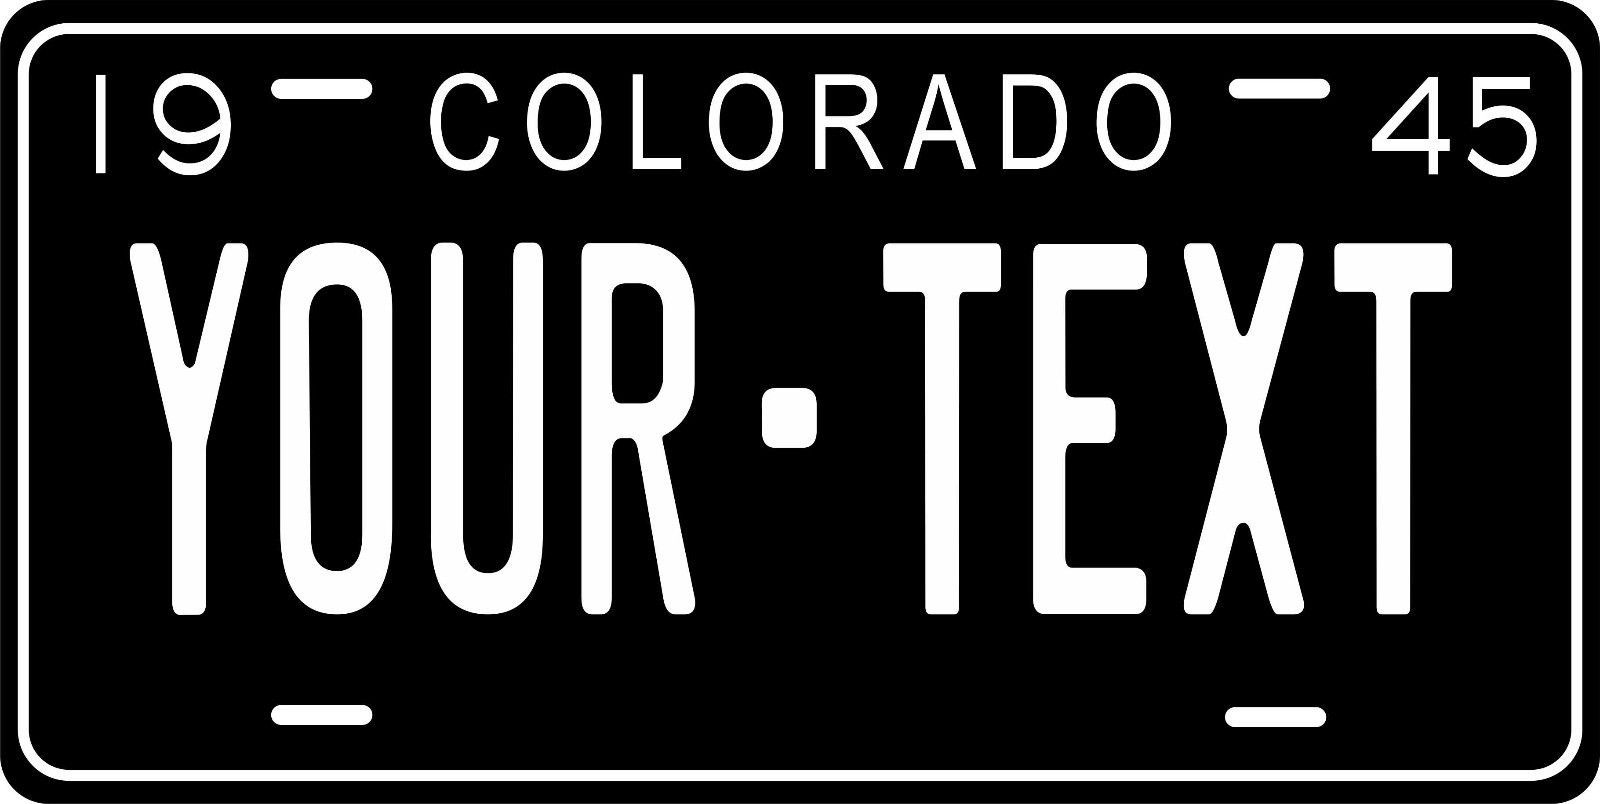 Colorado 1945 License Plate Personalized Custom Car Bike Motorcycle Moped Tag - $10.99 - $18.22